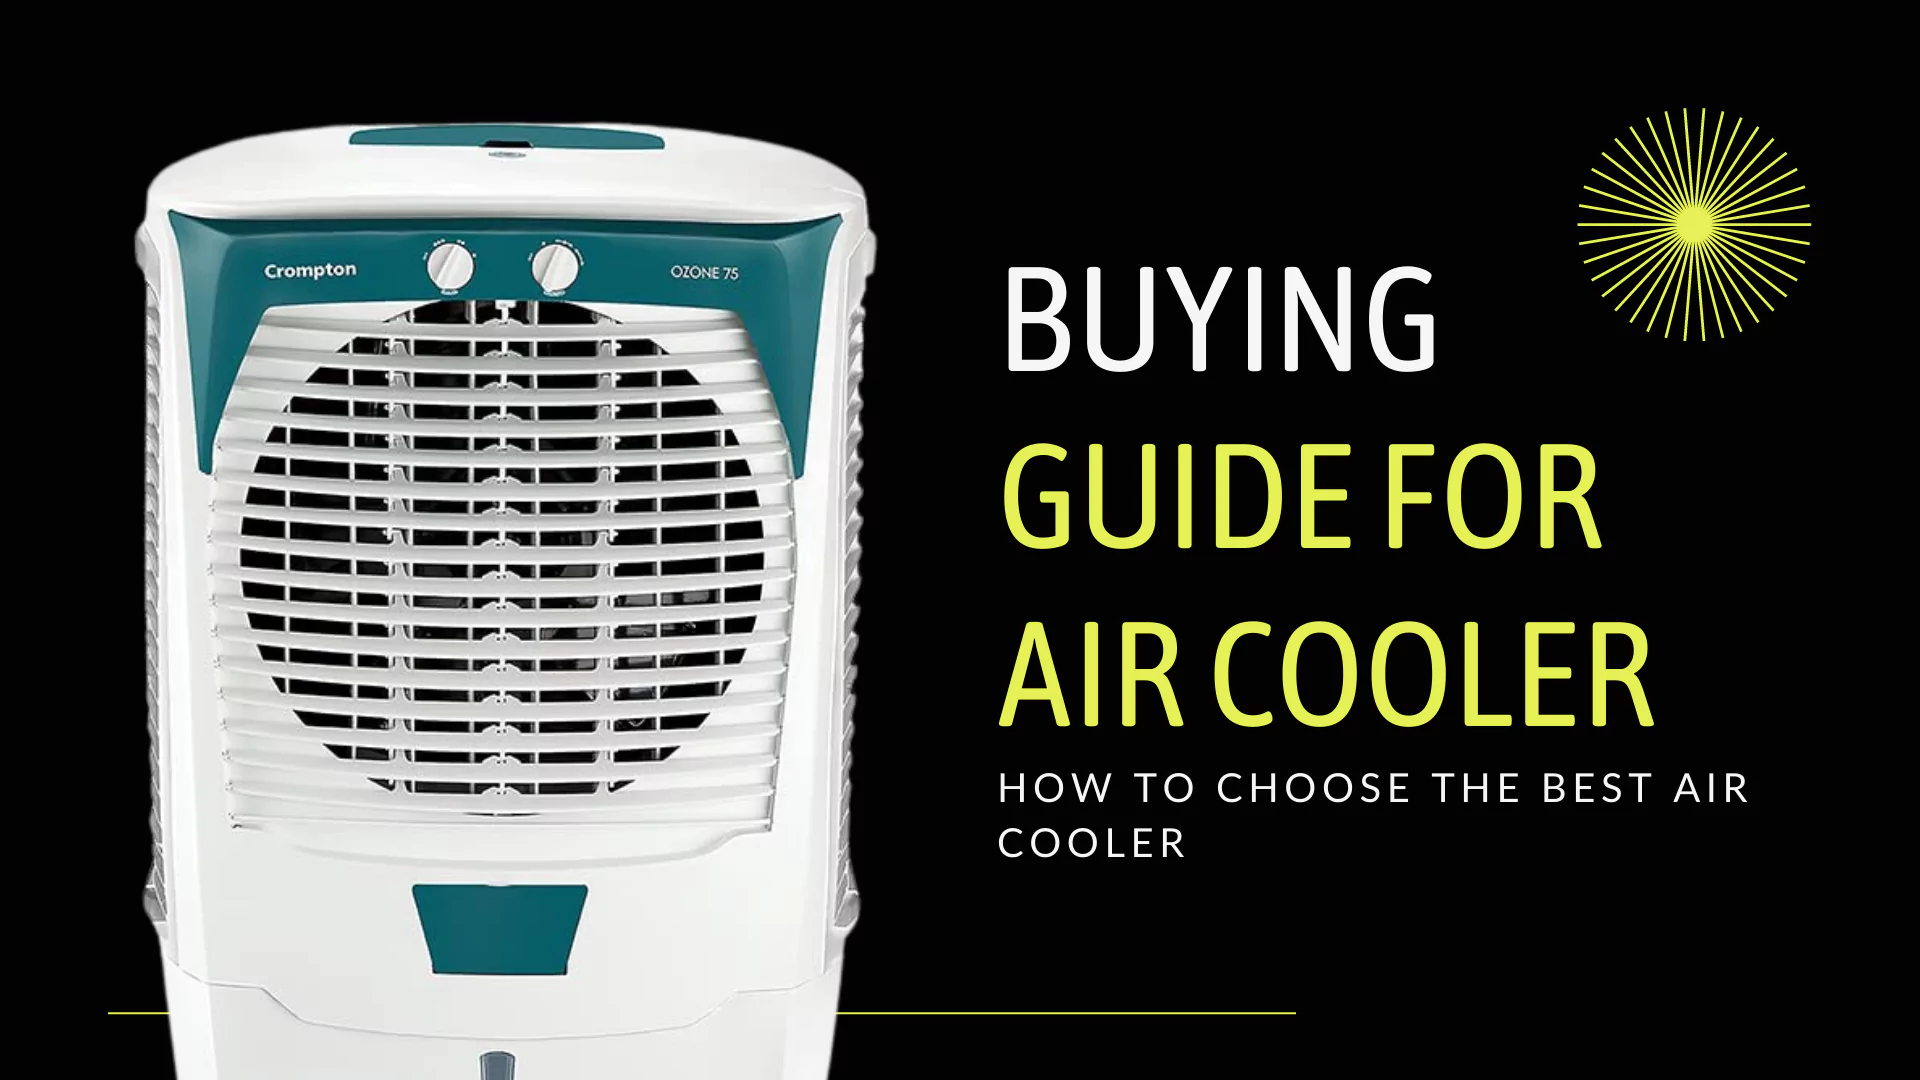 How To Choose The Best Air Cooler - Buying Guide for Air Cooler